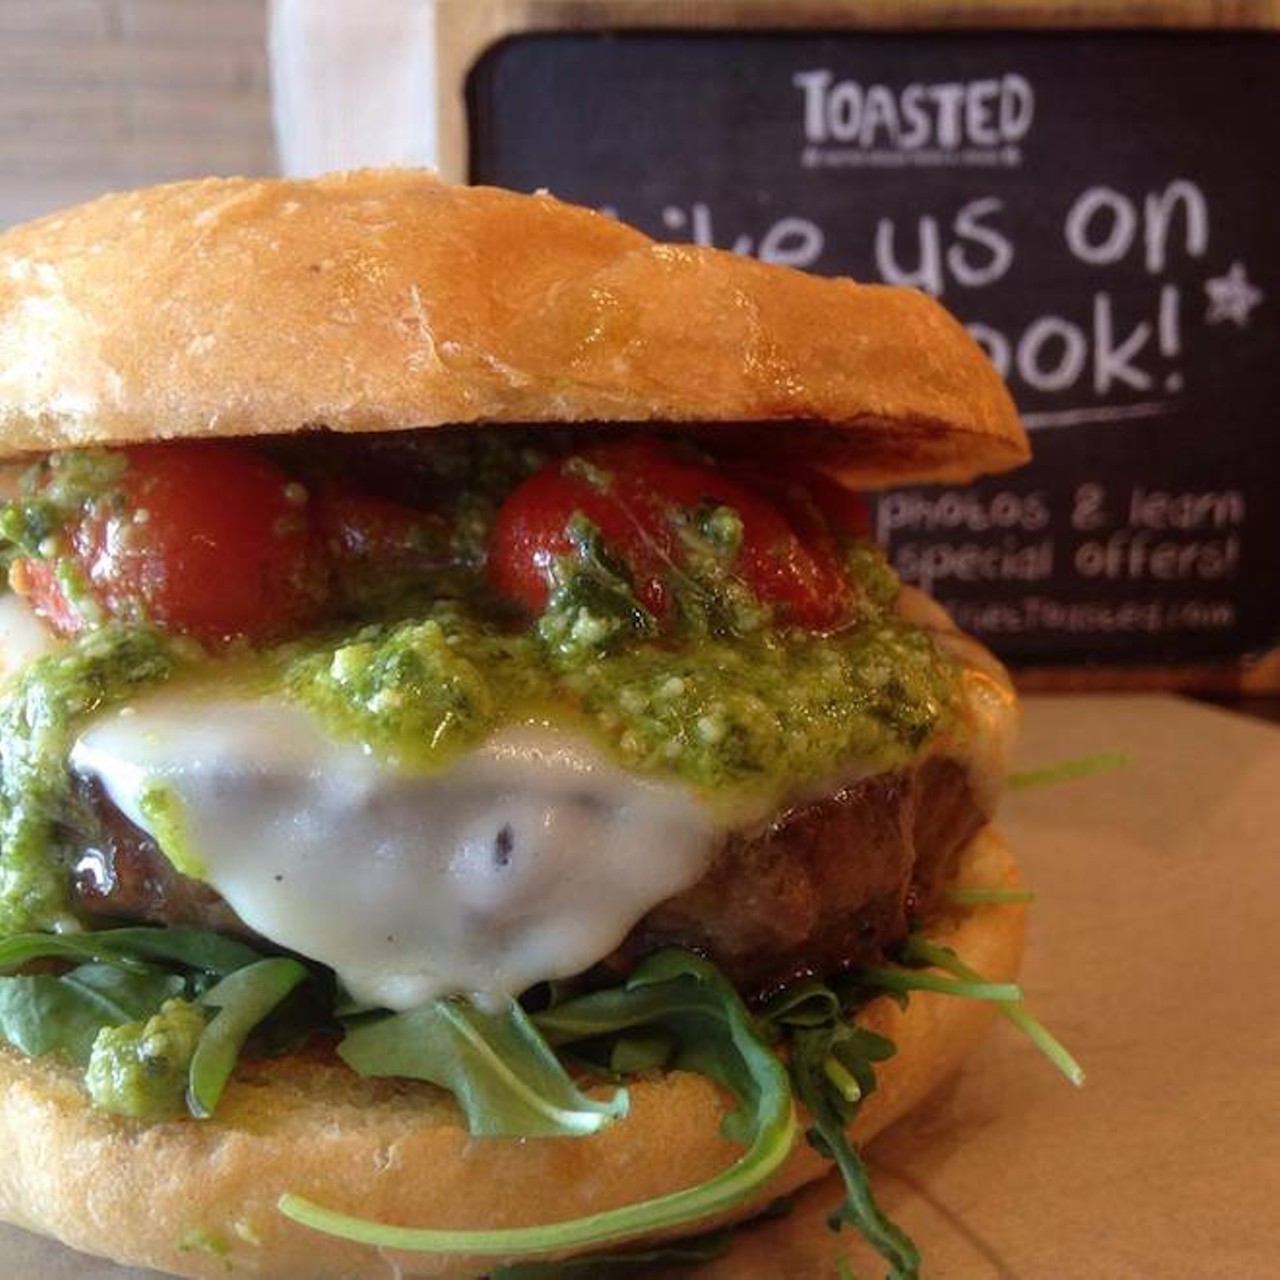 The Holy BasilToasted, 1945 Aloma Ave.Good for more than just grilled cheese, Toasted offers an awesome selection of burgers, like the Holy Basil, which features pesto and a tomato chutney.Photo via Toasted